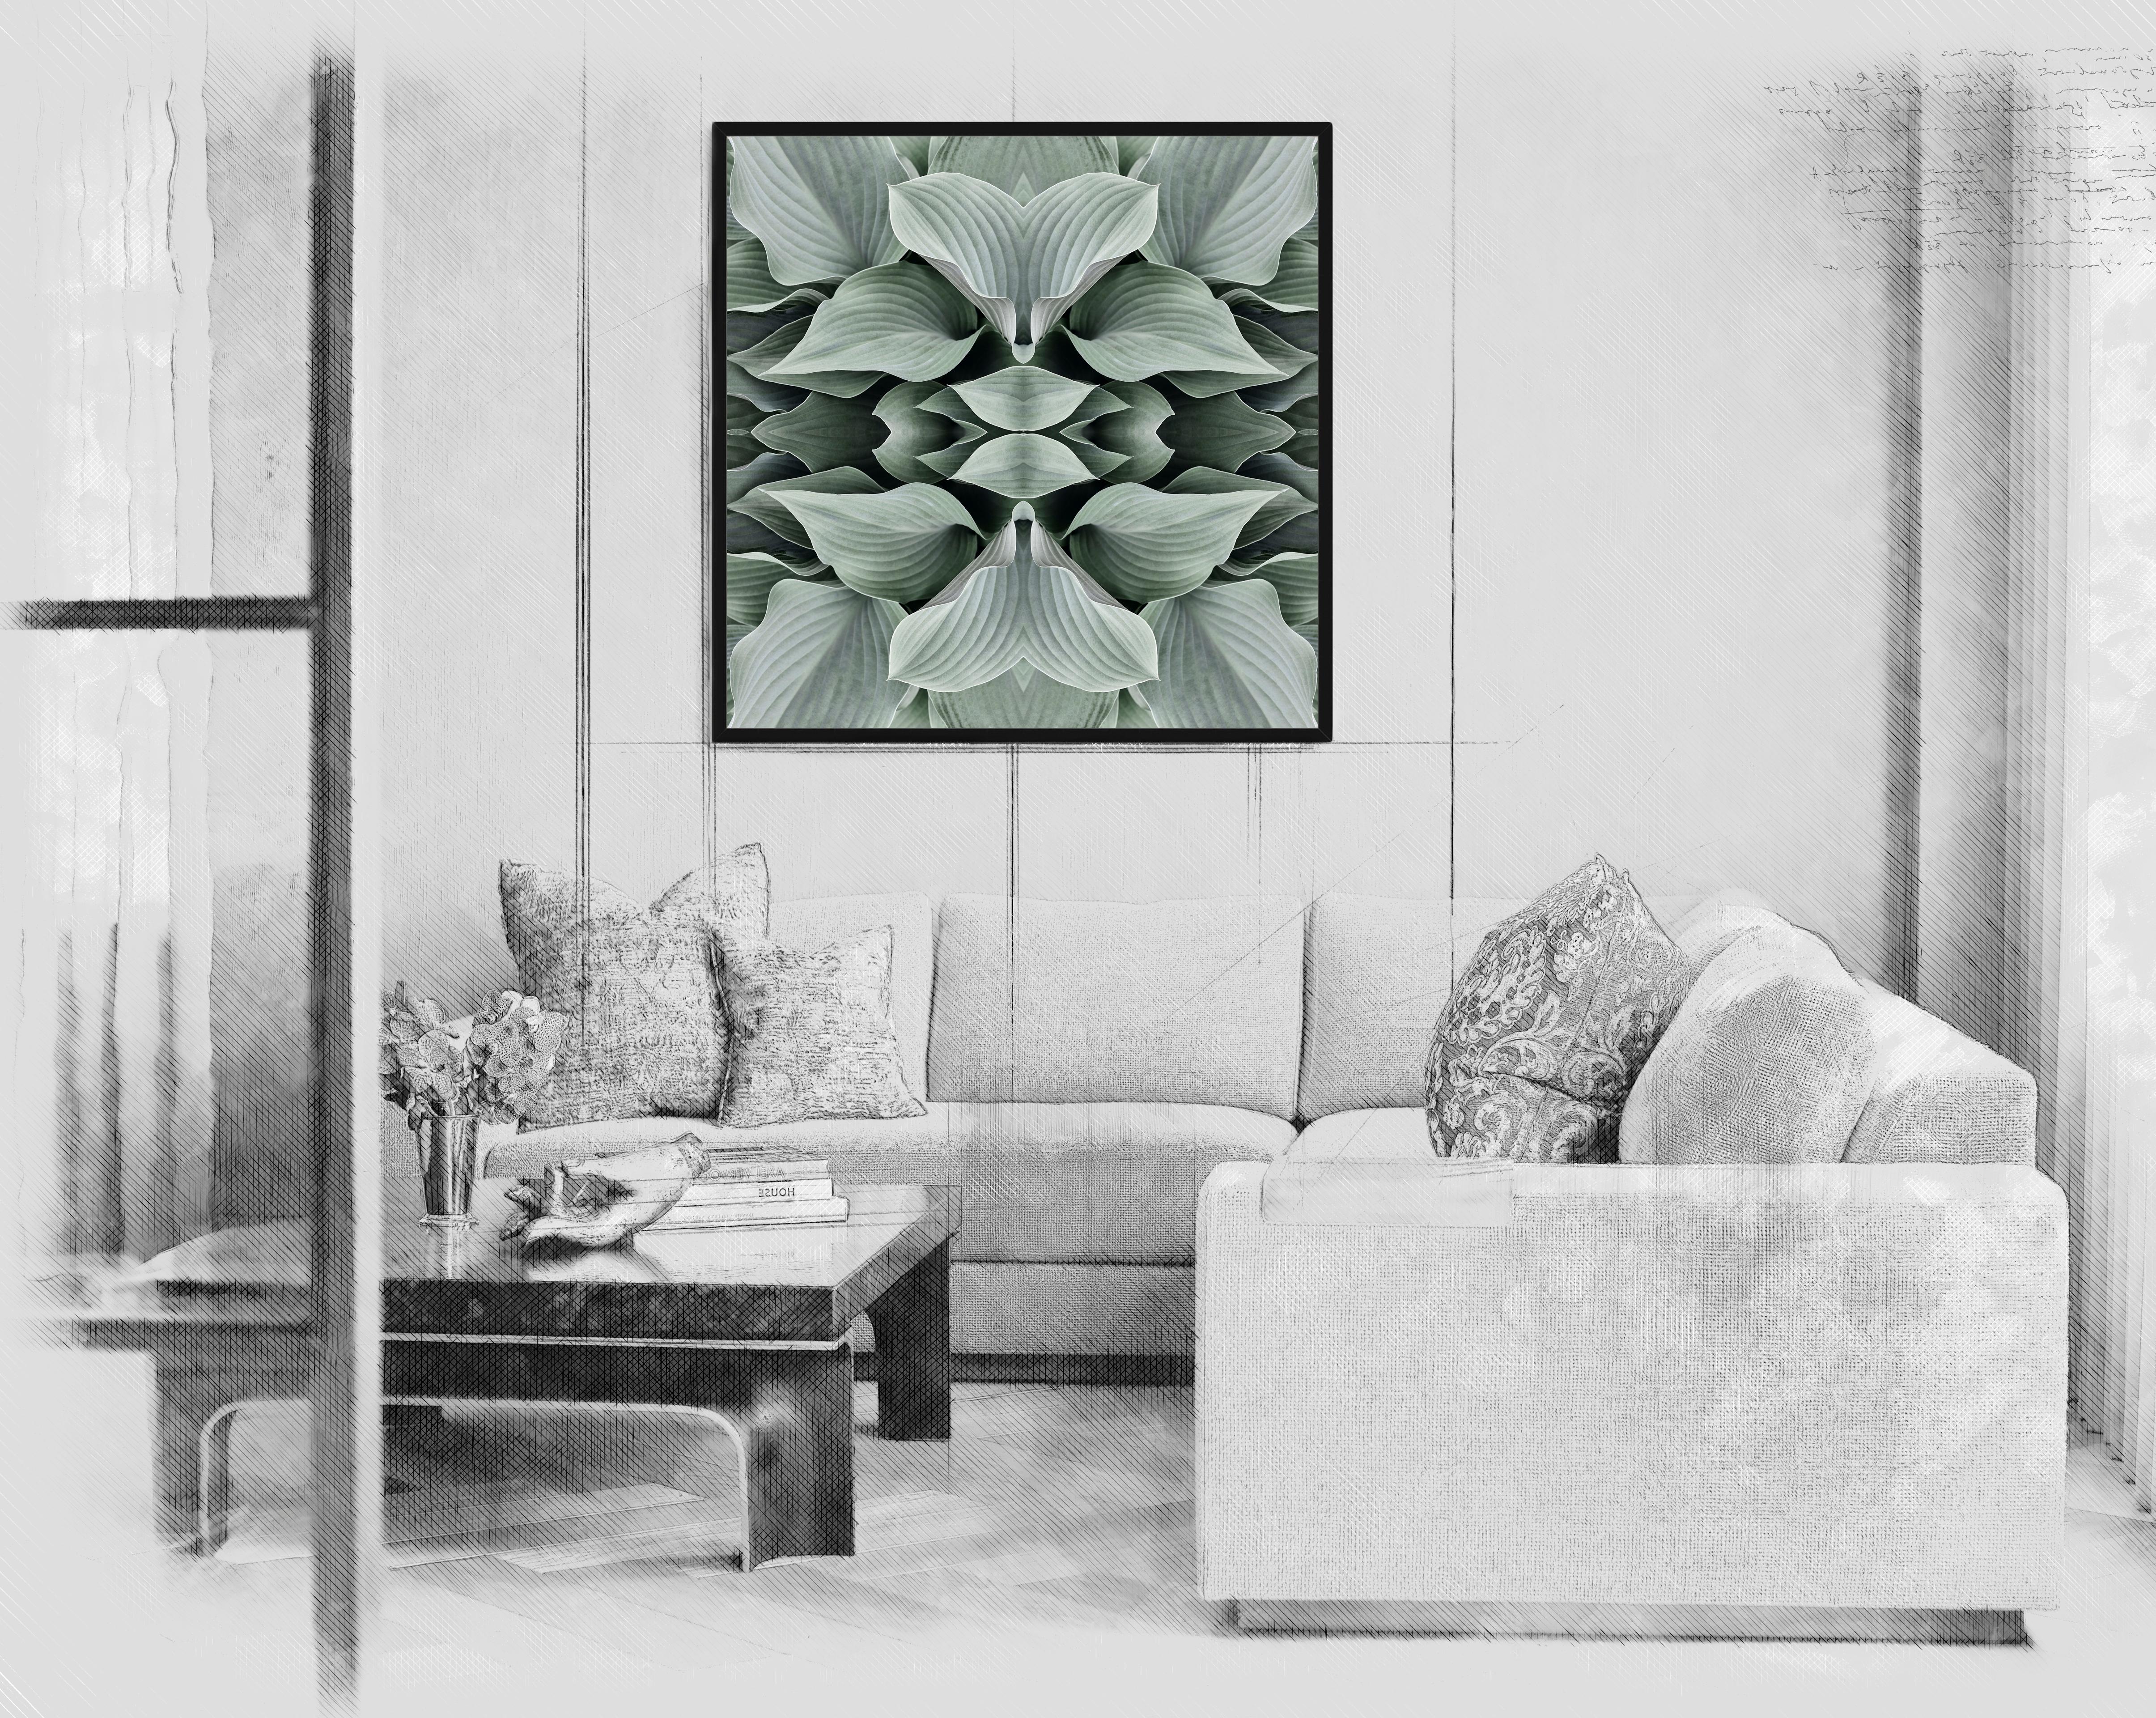 This print features the playful relationship between natural forms and botanicals. In this image Erin uses the natural composition of the muted green Hosta leaves, and her own collage work, to create a hypnotic mandala with the floral. Some describe